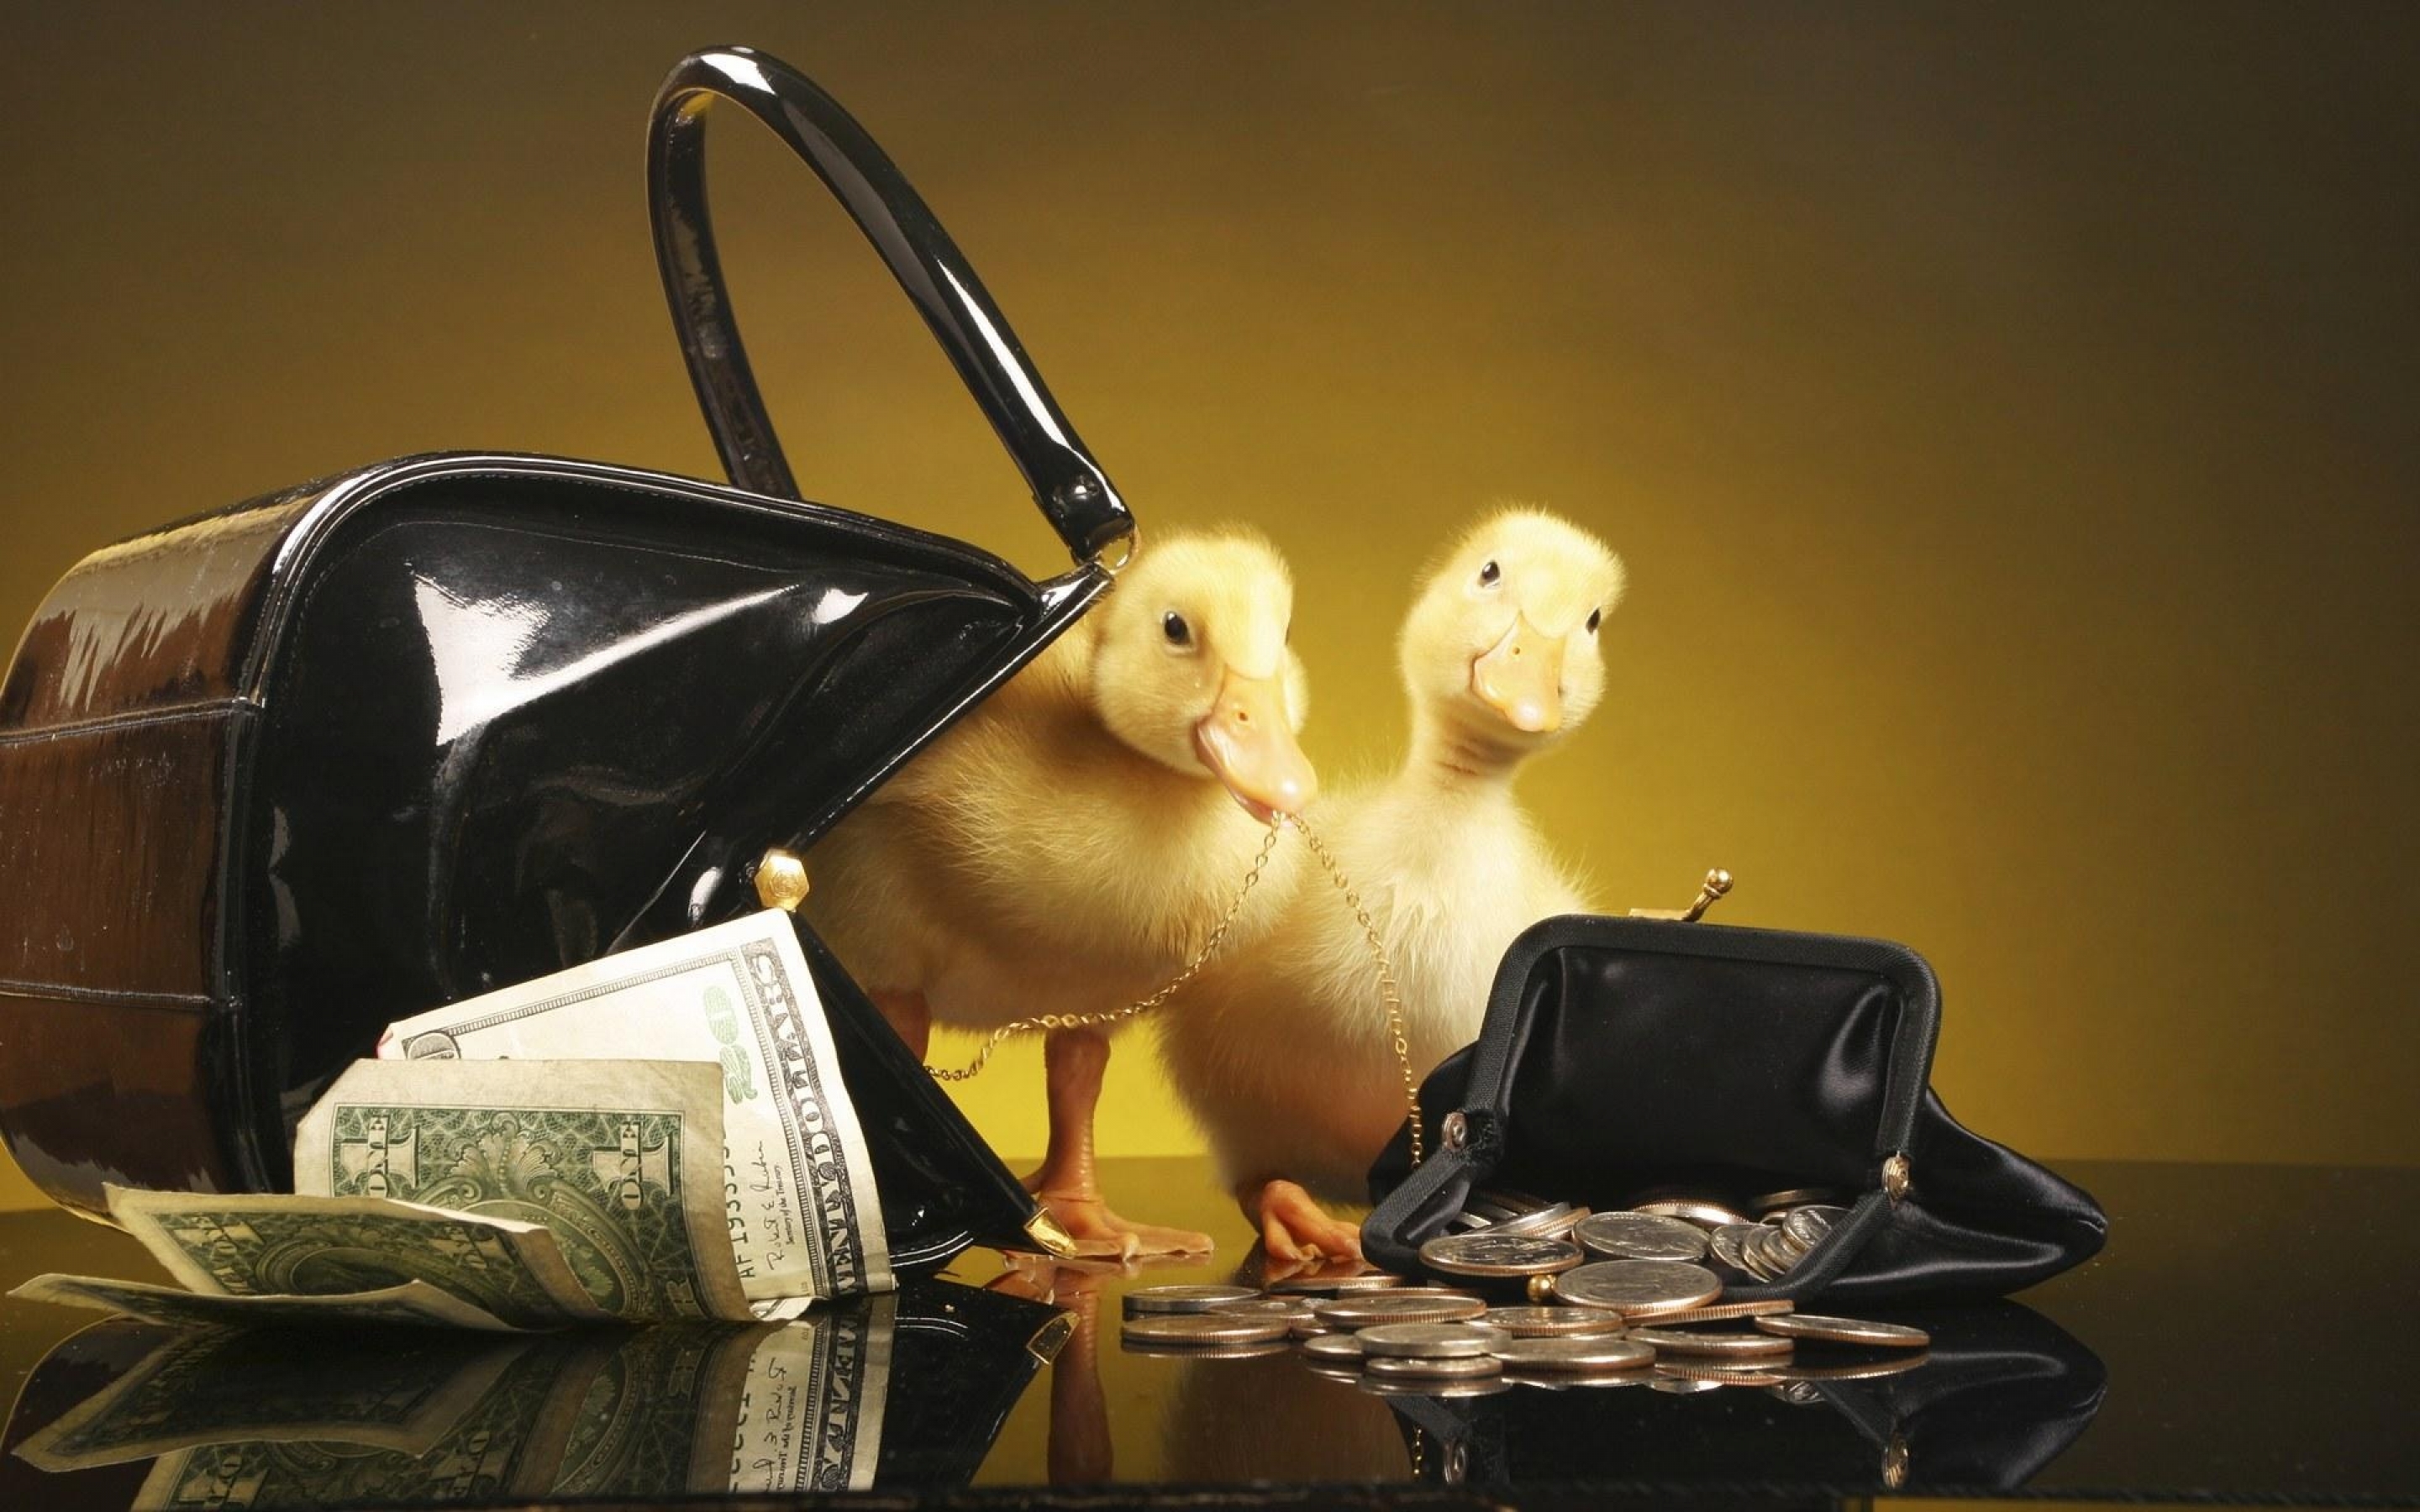 ducklings, With, Purse, And, Money Wallpaper